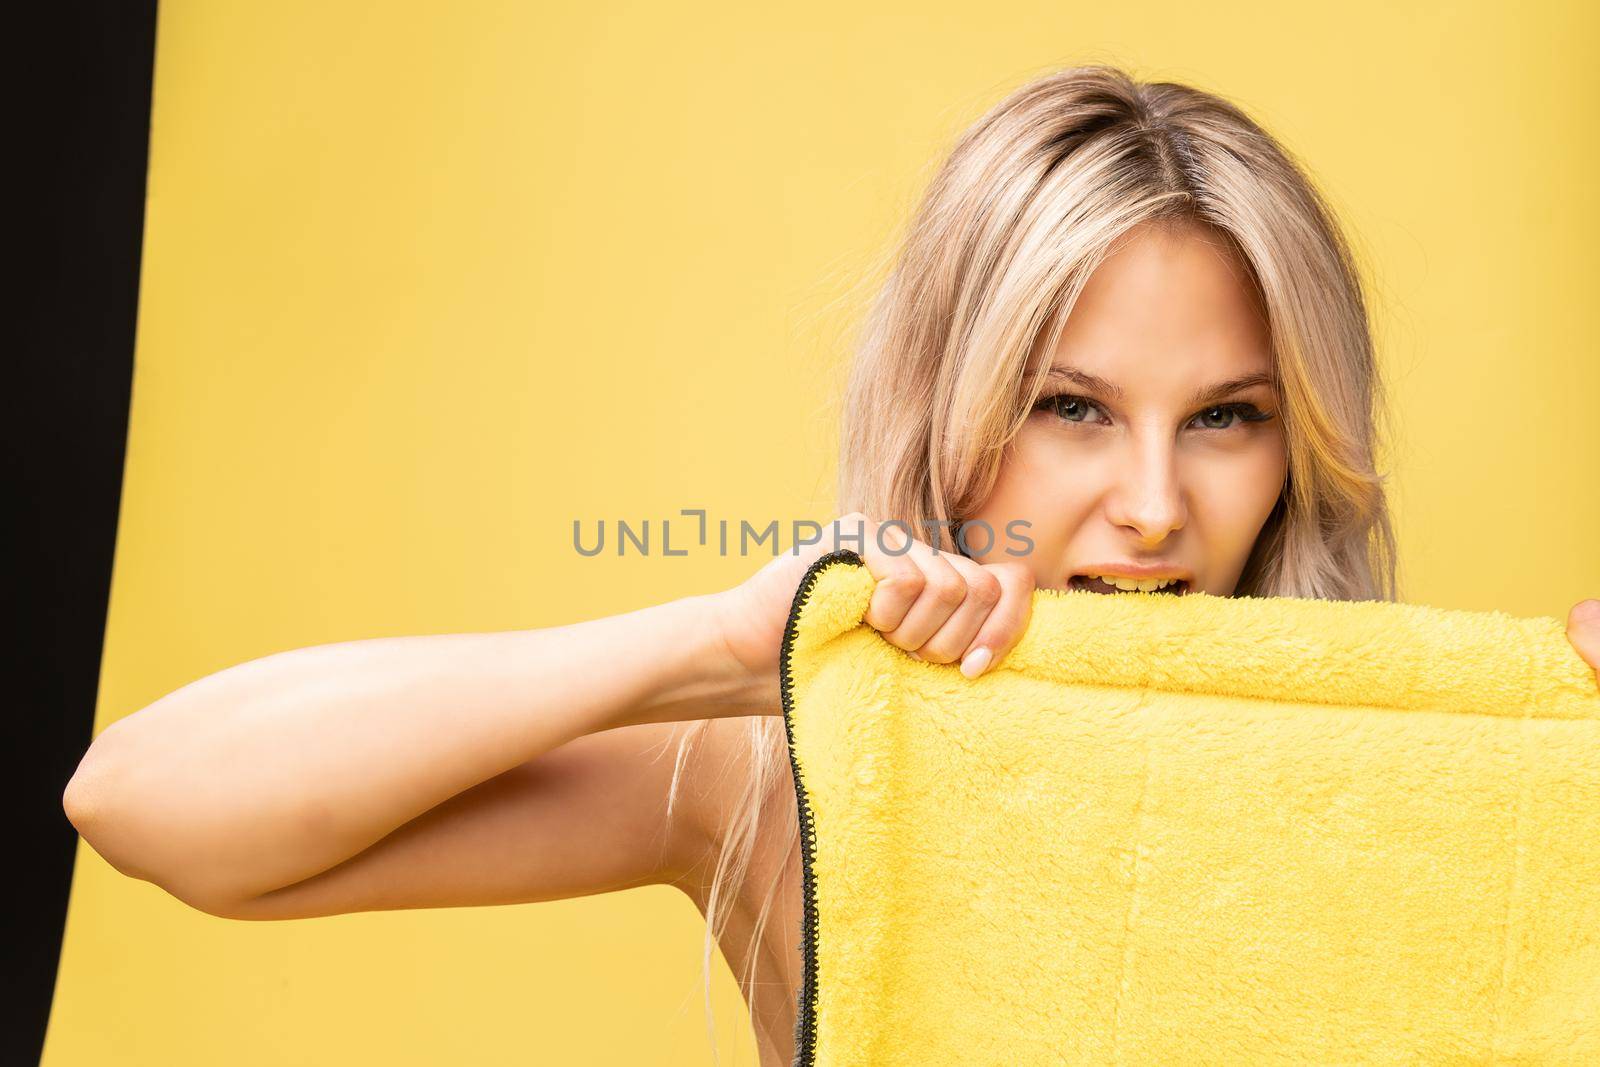 Girl rips rag with her hands yellow on a yellow background beautiful blonde dust maid, rubber protective hygiene clean virus, wiping cute. Helpful copy cleanly, woman around duties